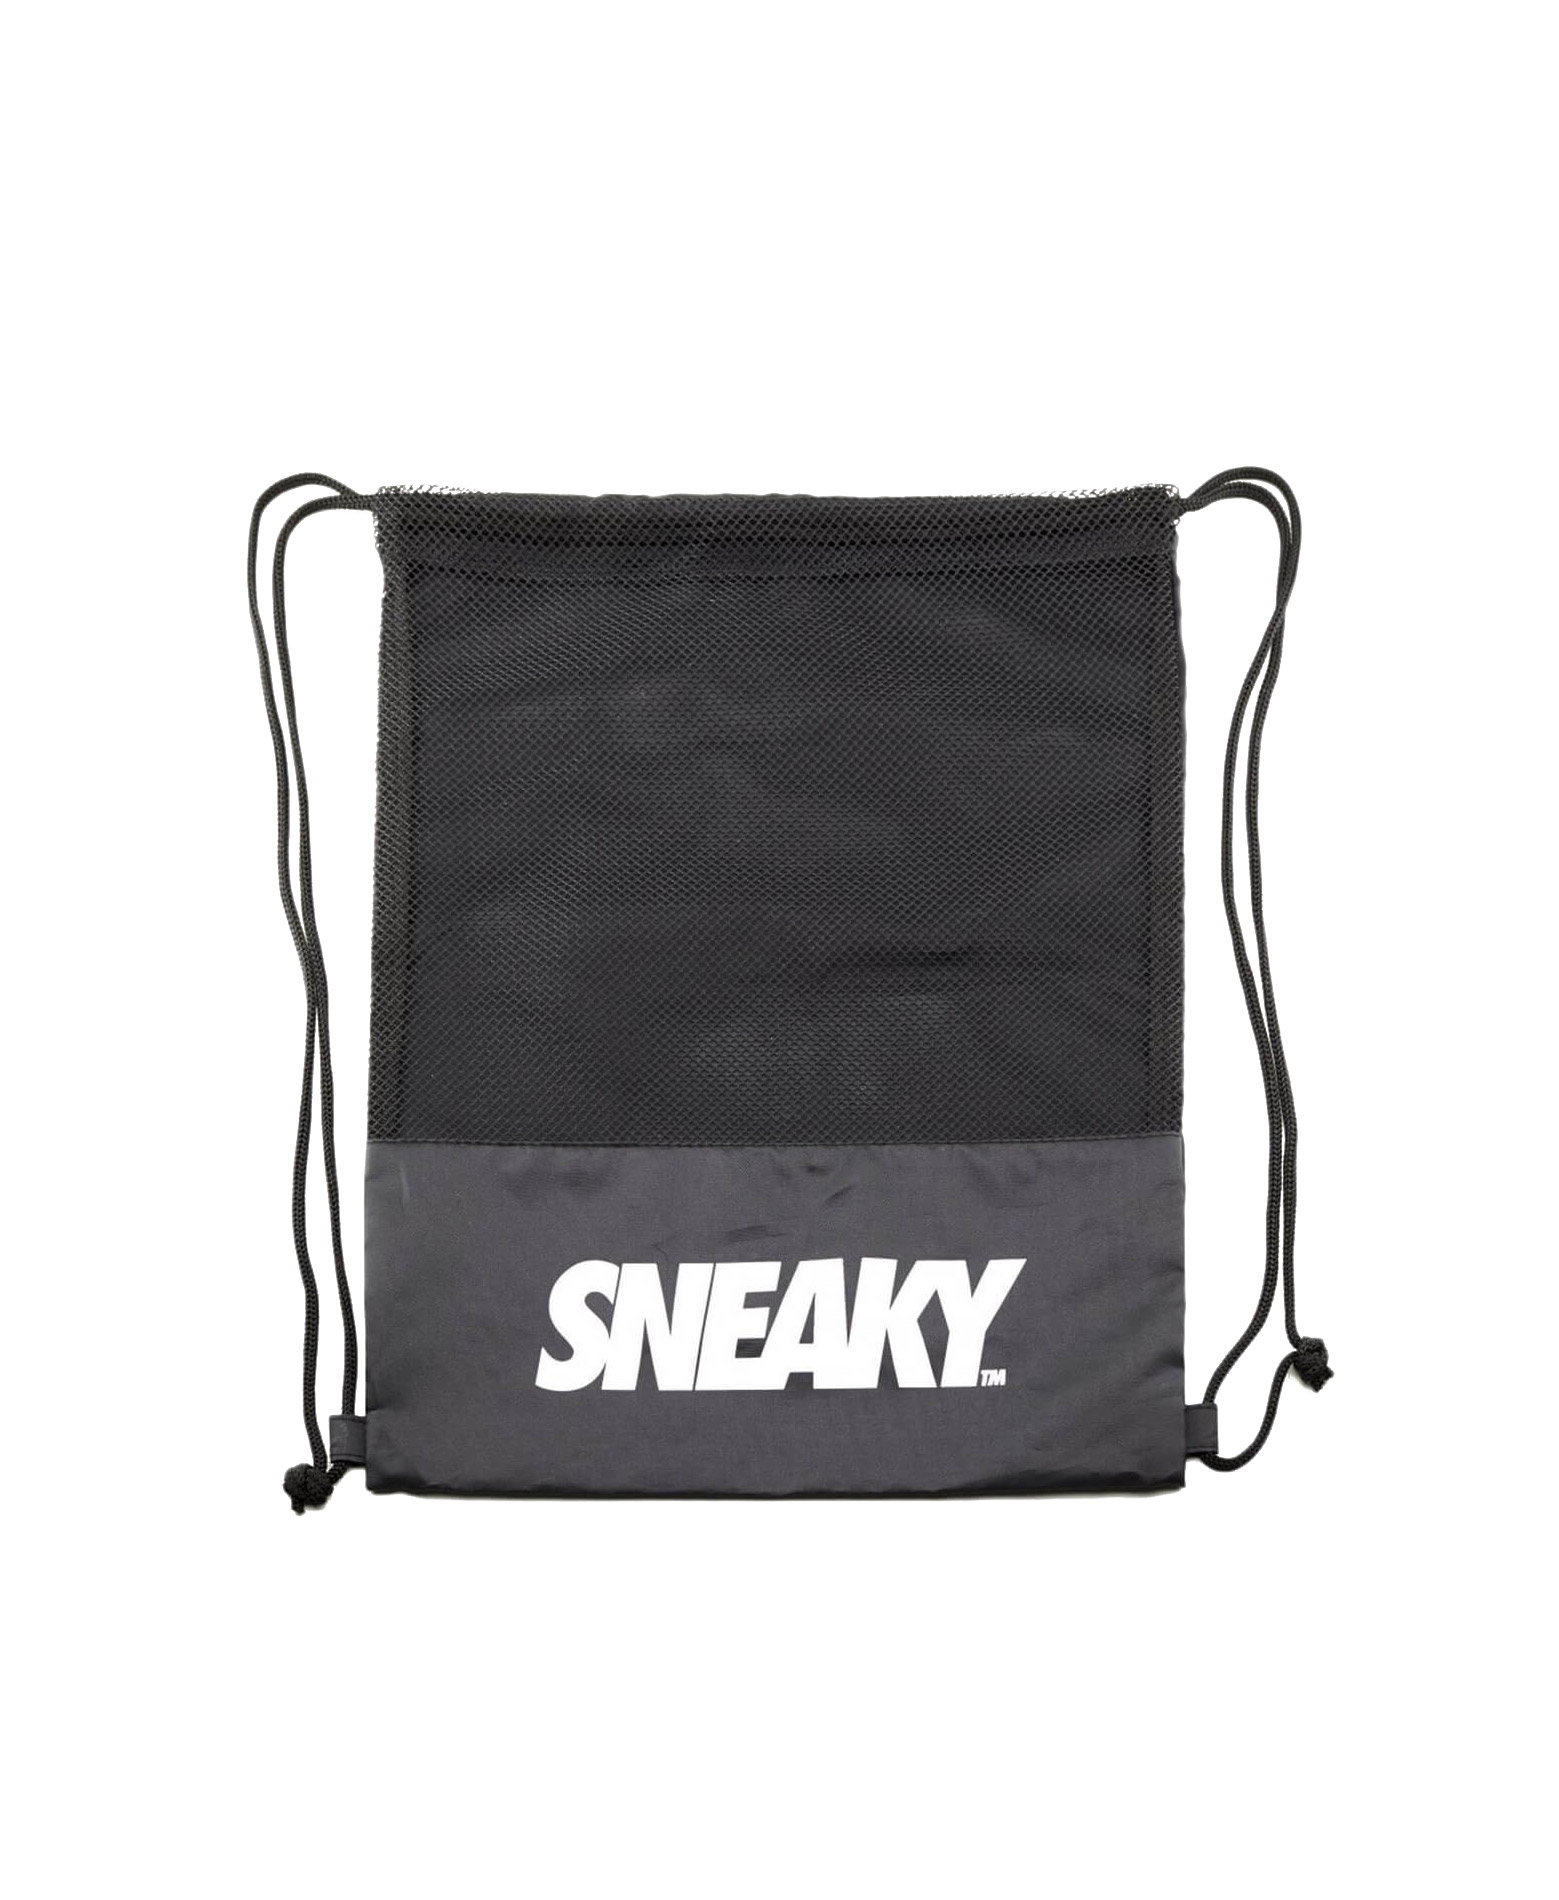 SNEAKY MULTI PURPOSE SHOE AND TRAINER CARRY BAG μαυρο 1913000 Ο-C